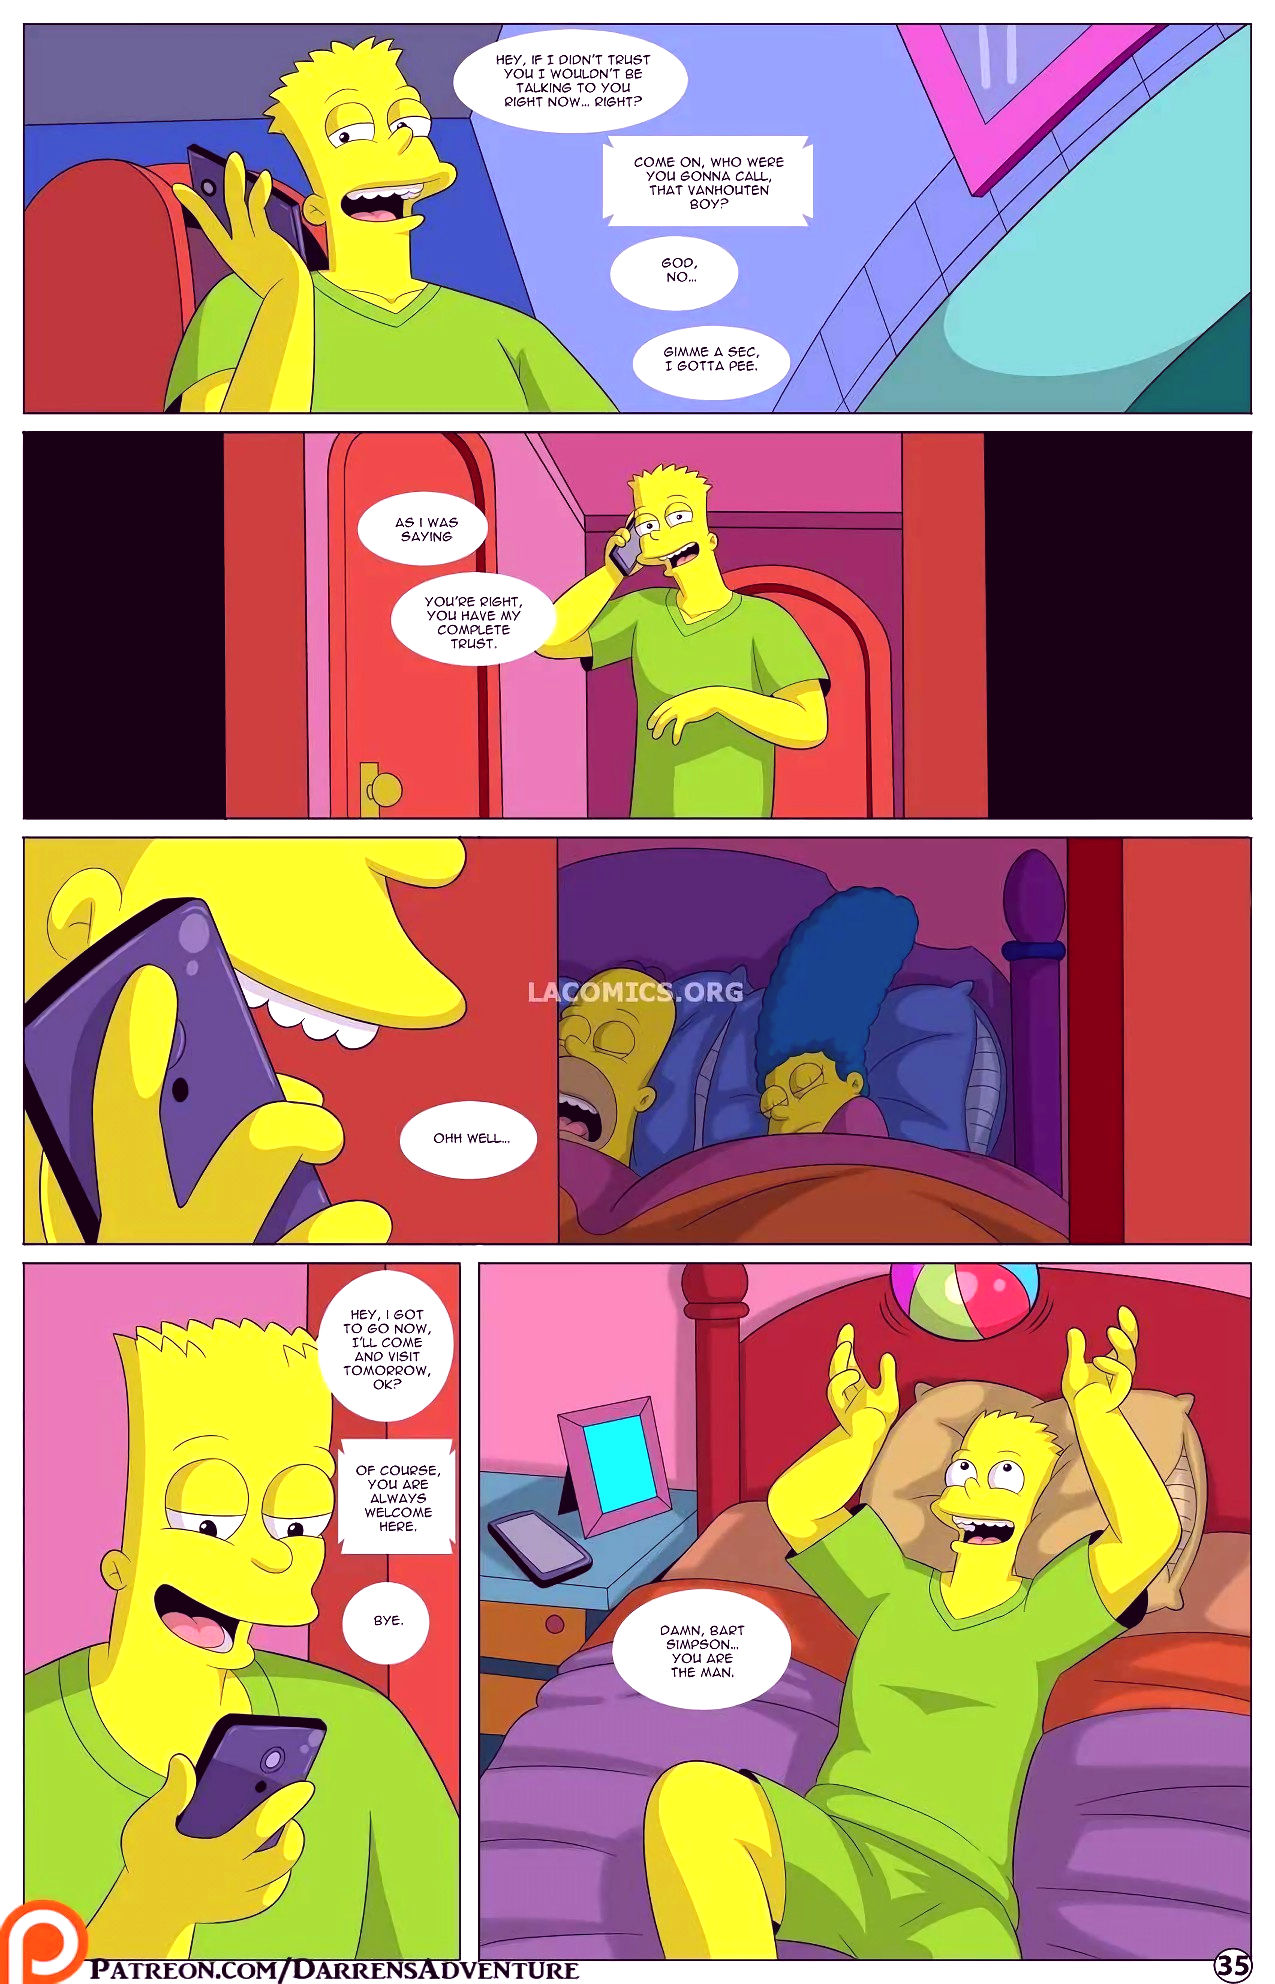 Darrens adventure or welcome to springfield porn comic picture 113